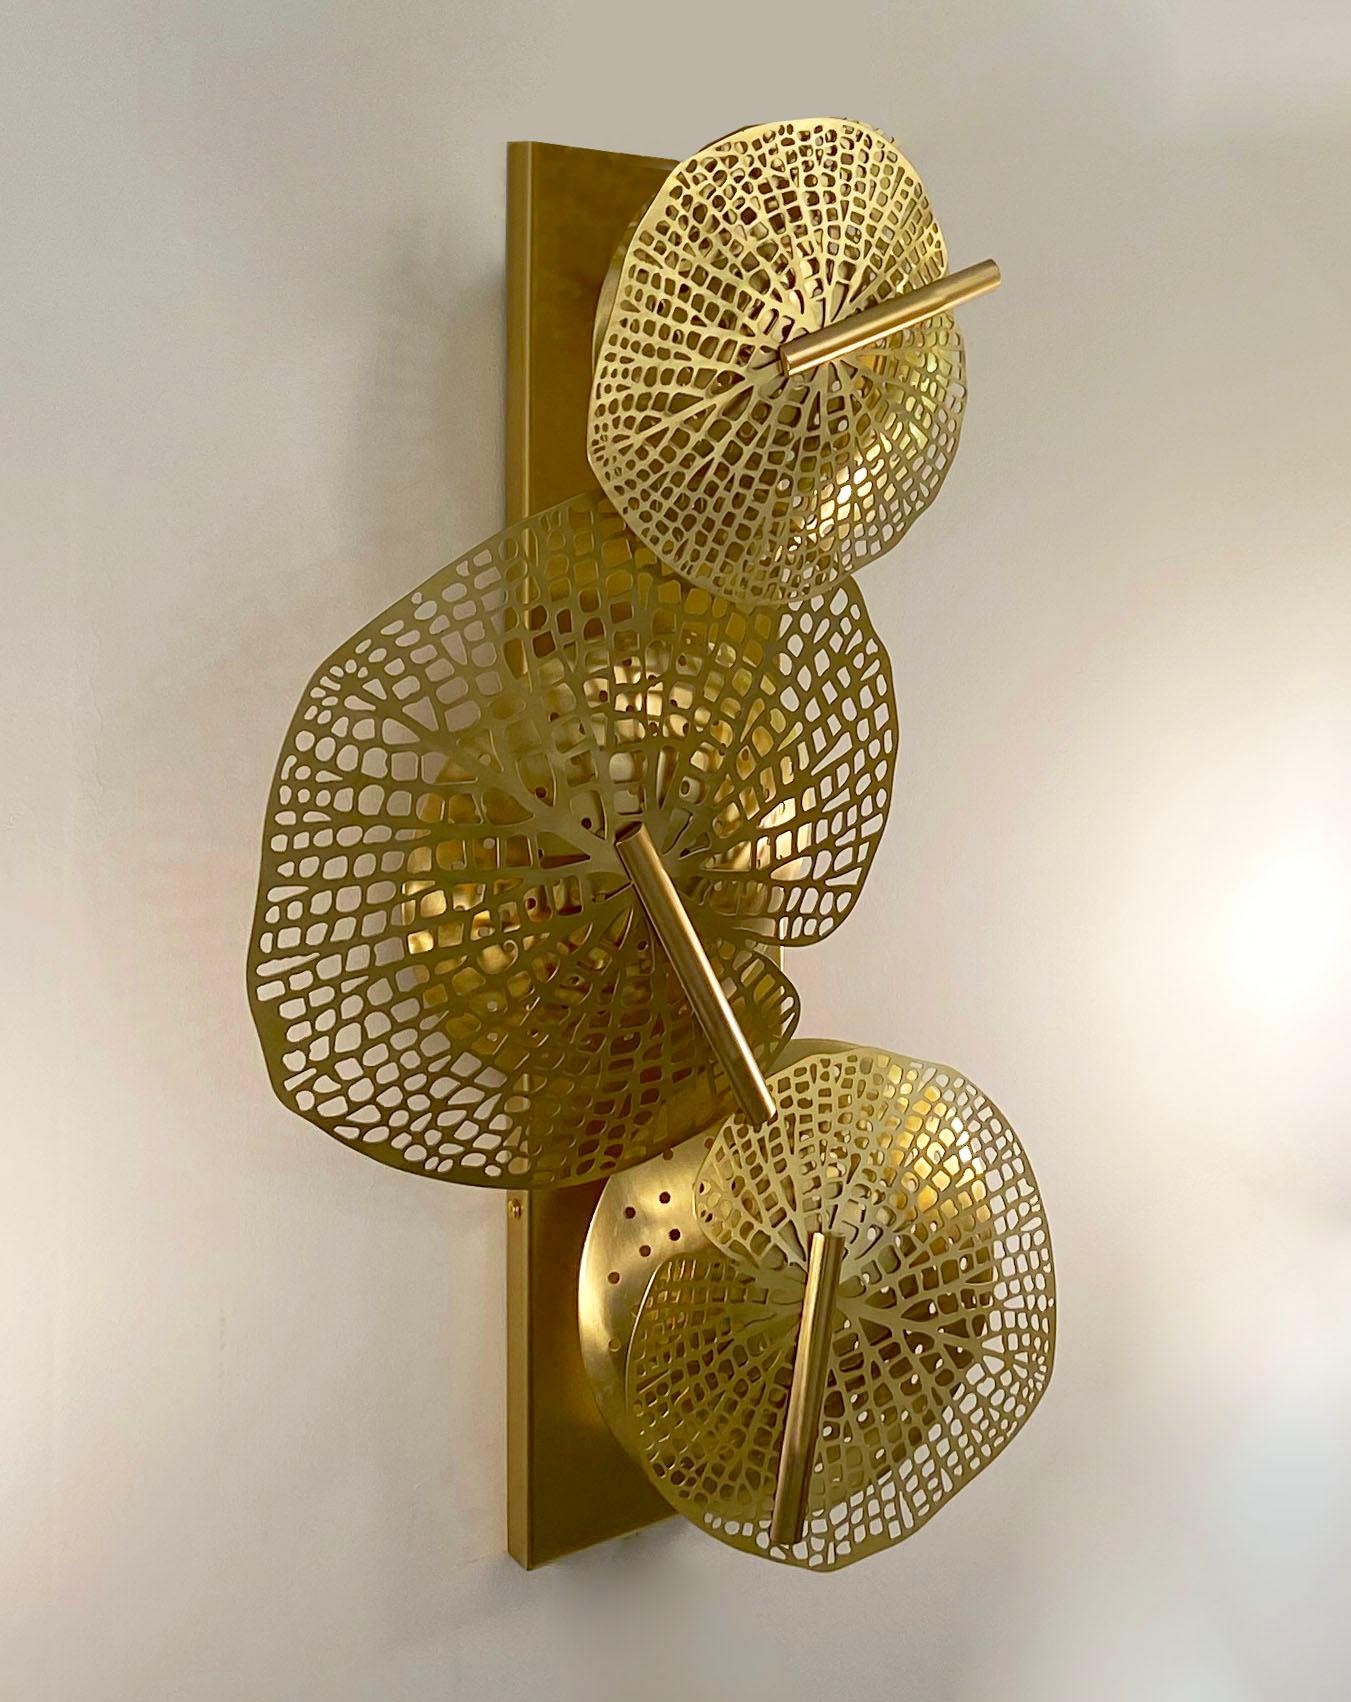 Metal Contemporary Bespoke Organic Italian Art Design Perforated Brass Leaf Wall Light For Sale